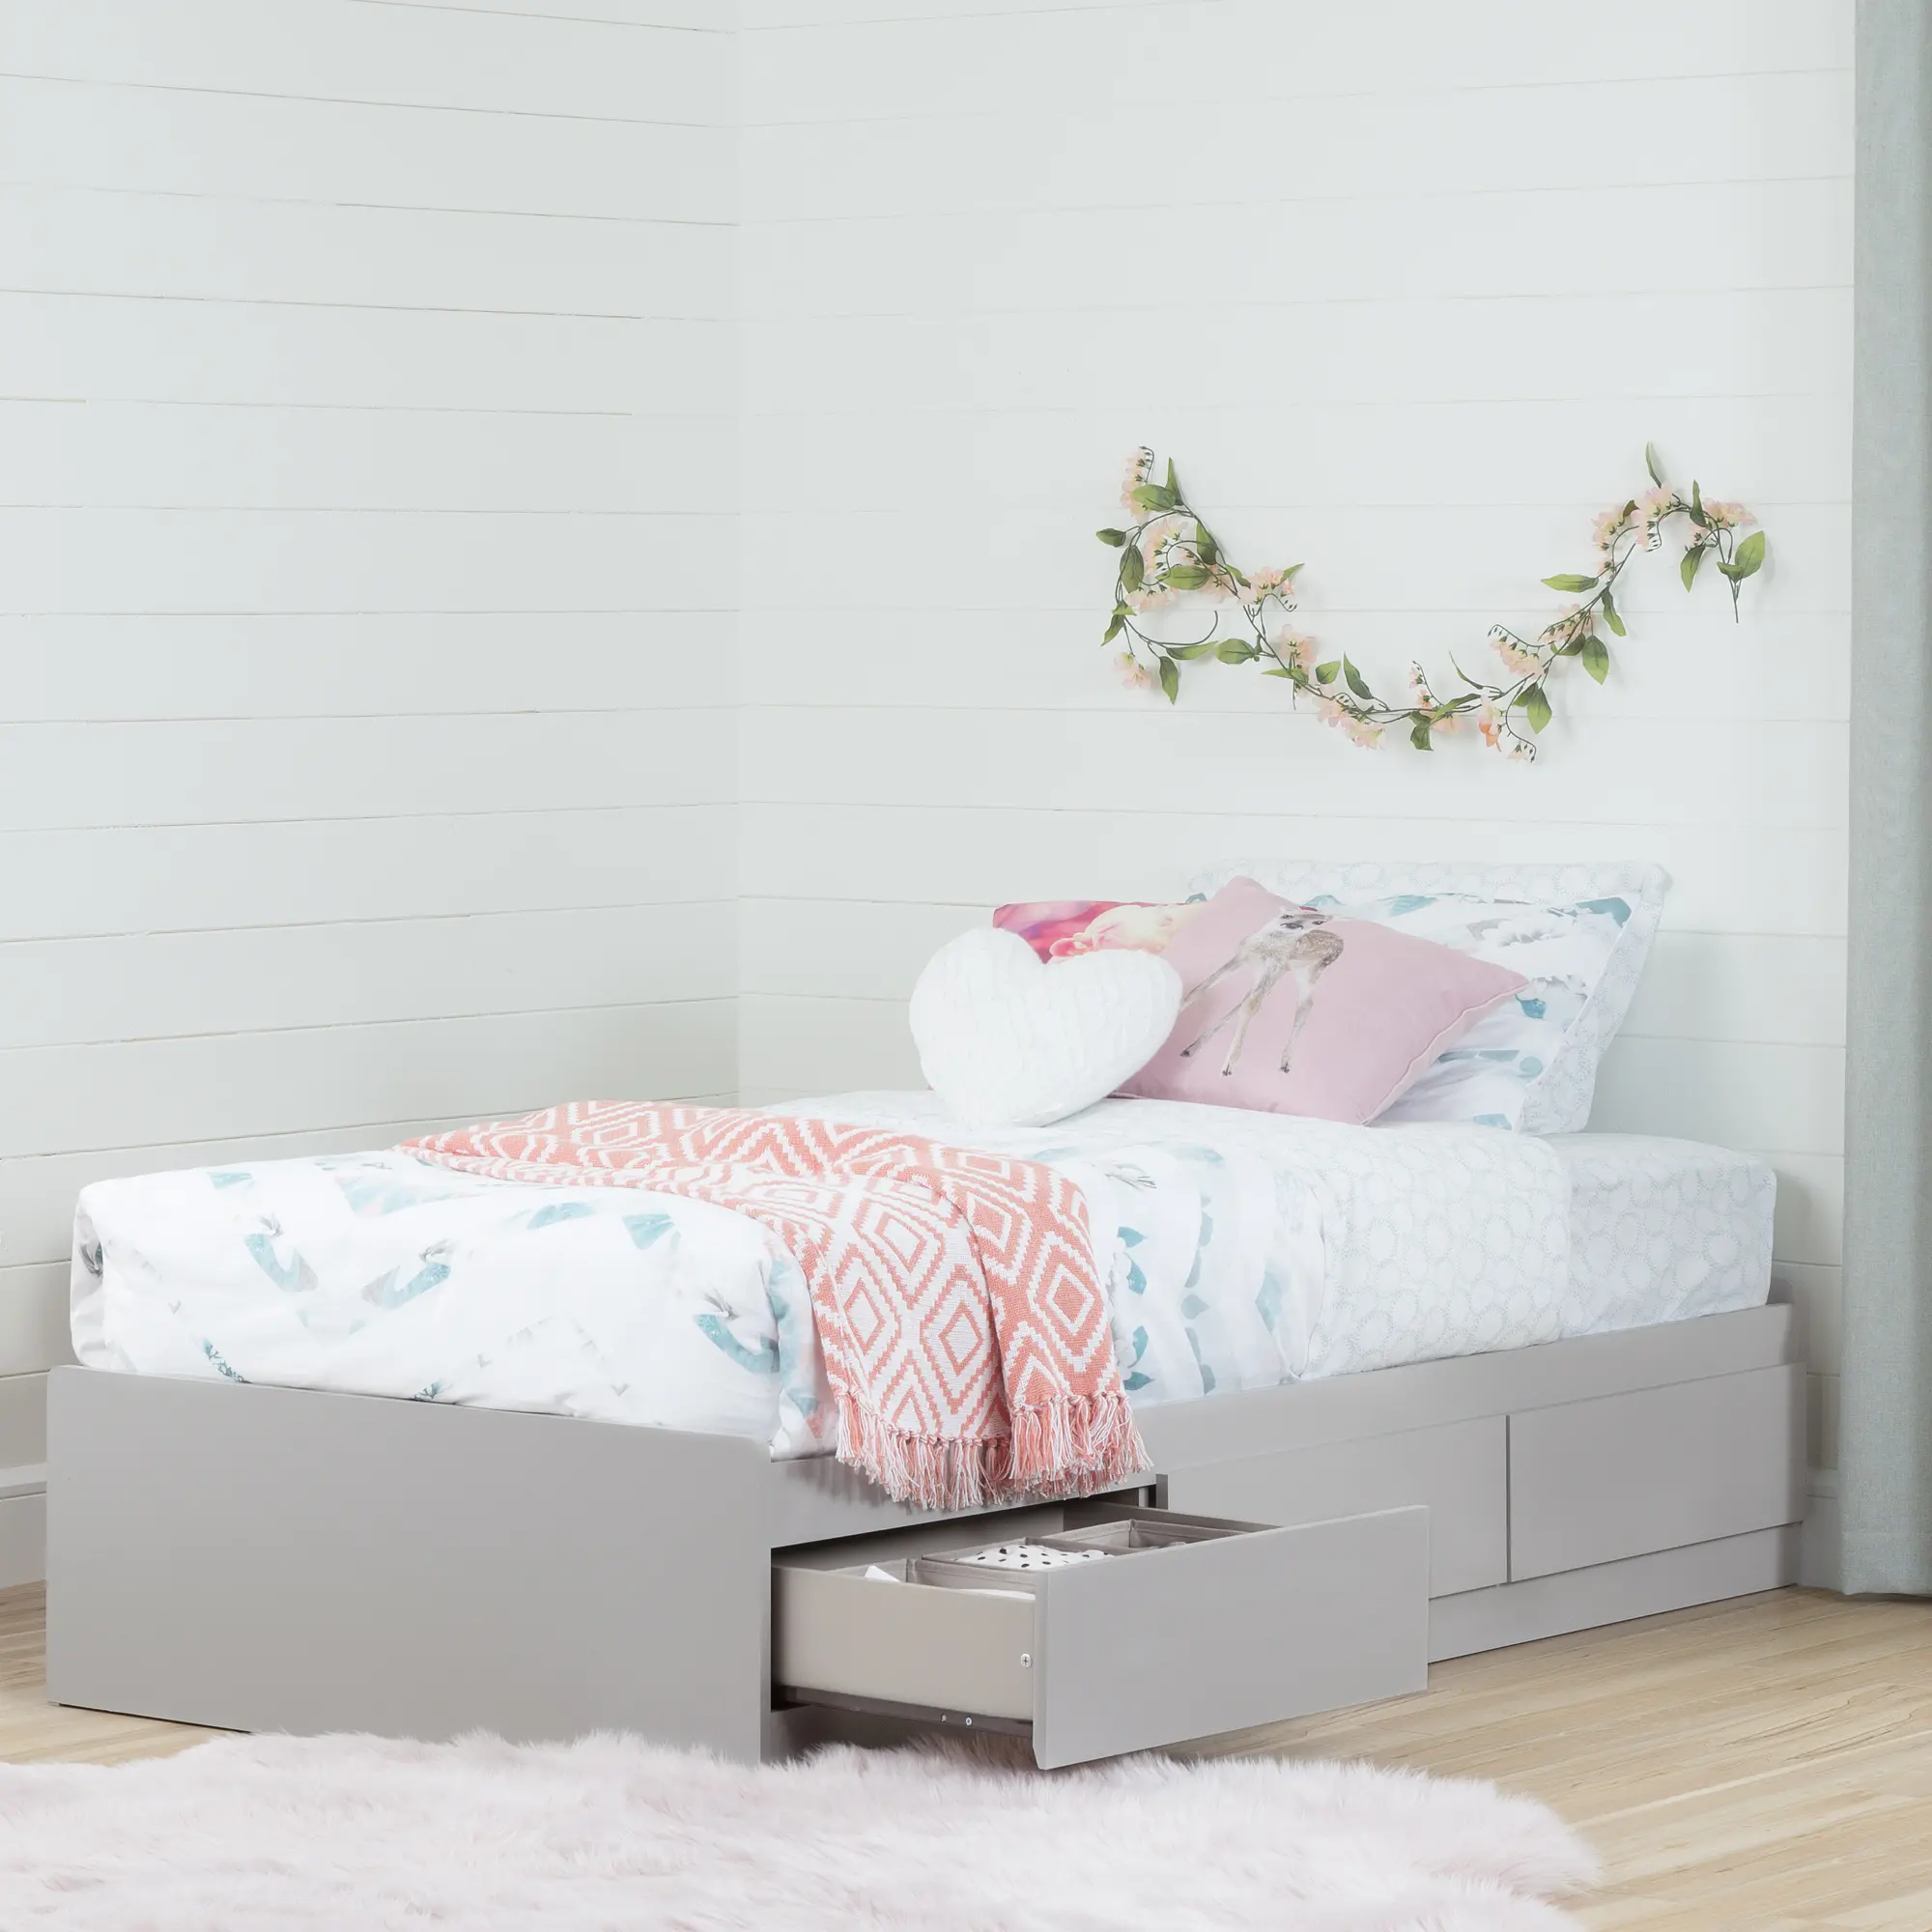 Reevo Gray Twin Mates Bed (39 Inch) - South Shore